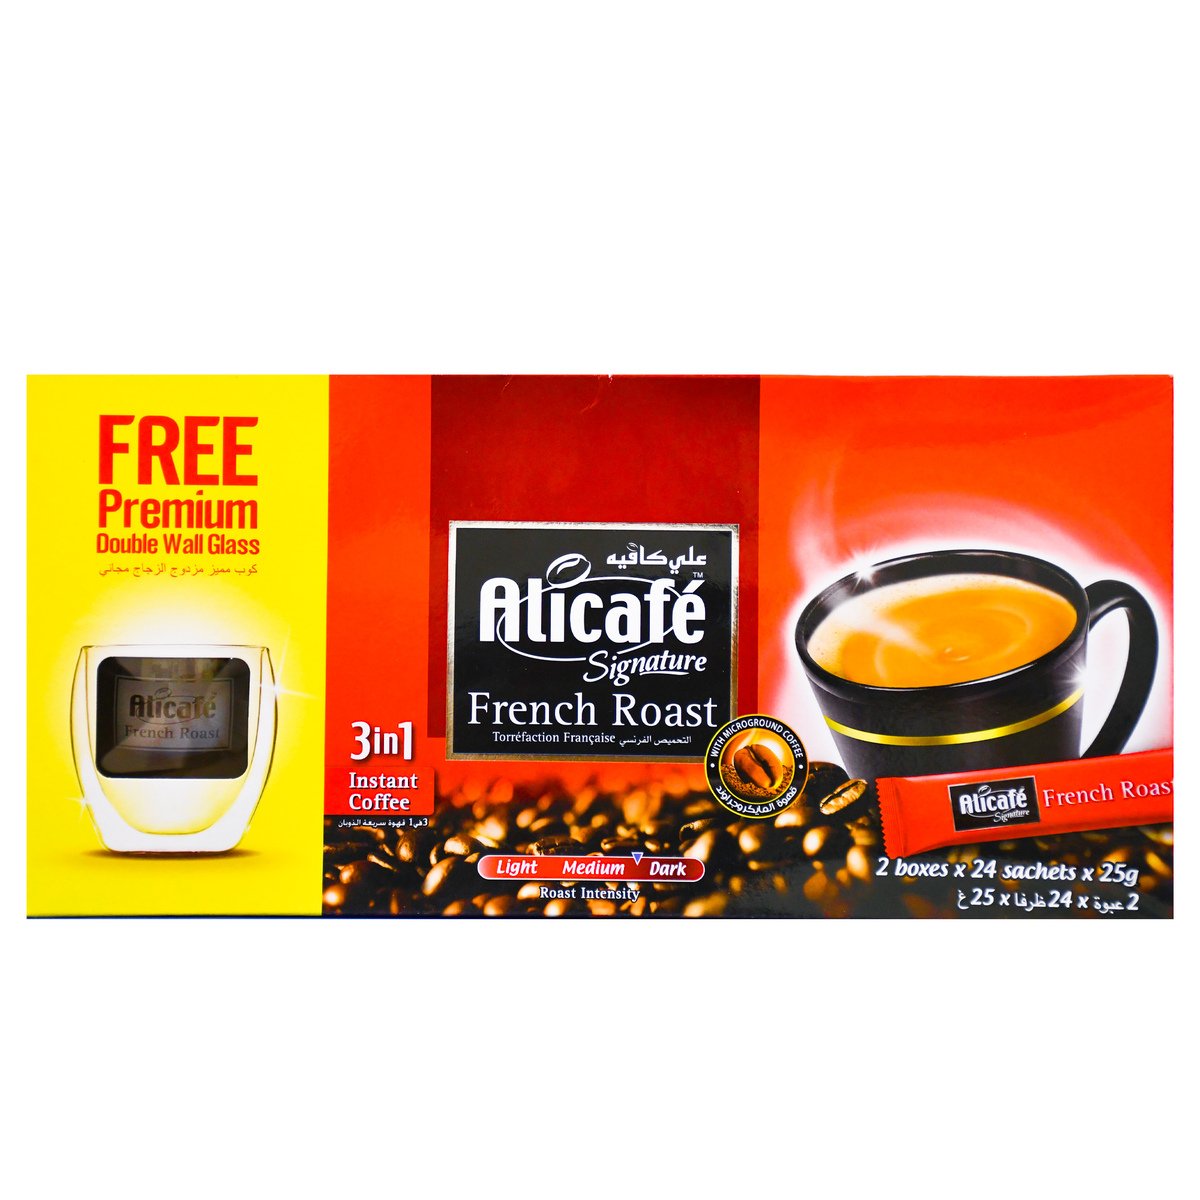 Alicafe Signature 3in1 French Roast Instant Coffee 48 x 25g + Offer